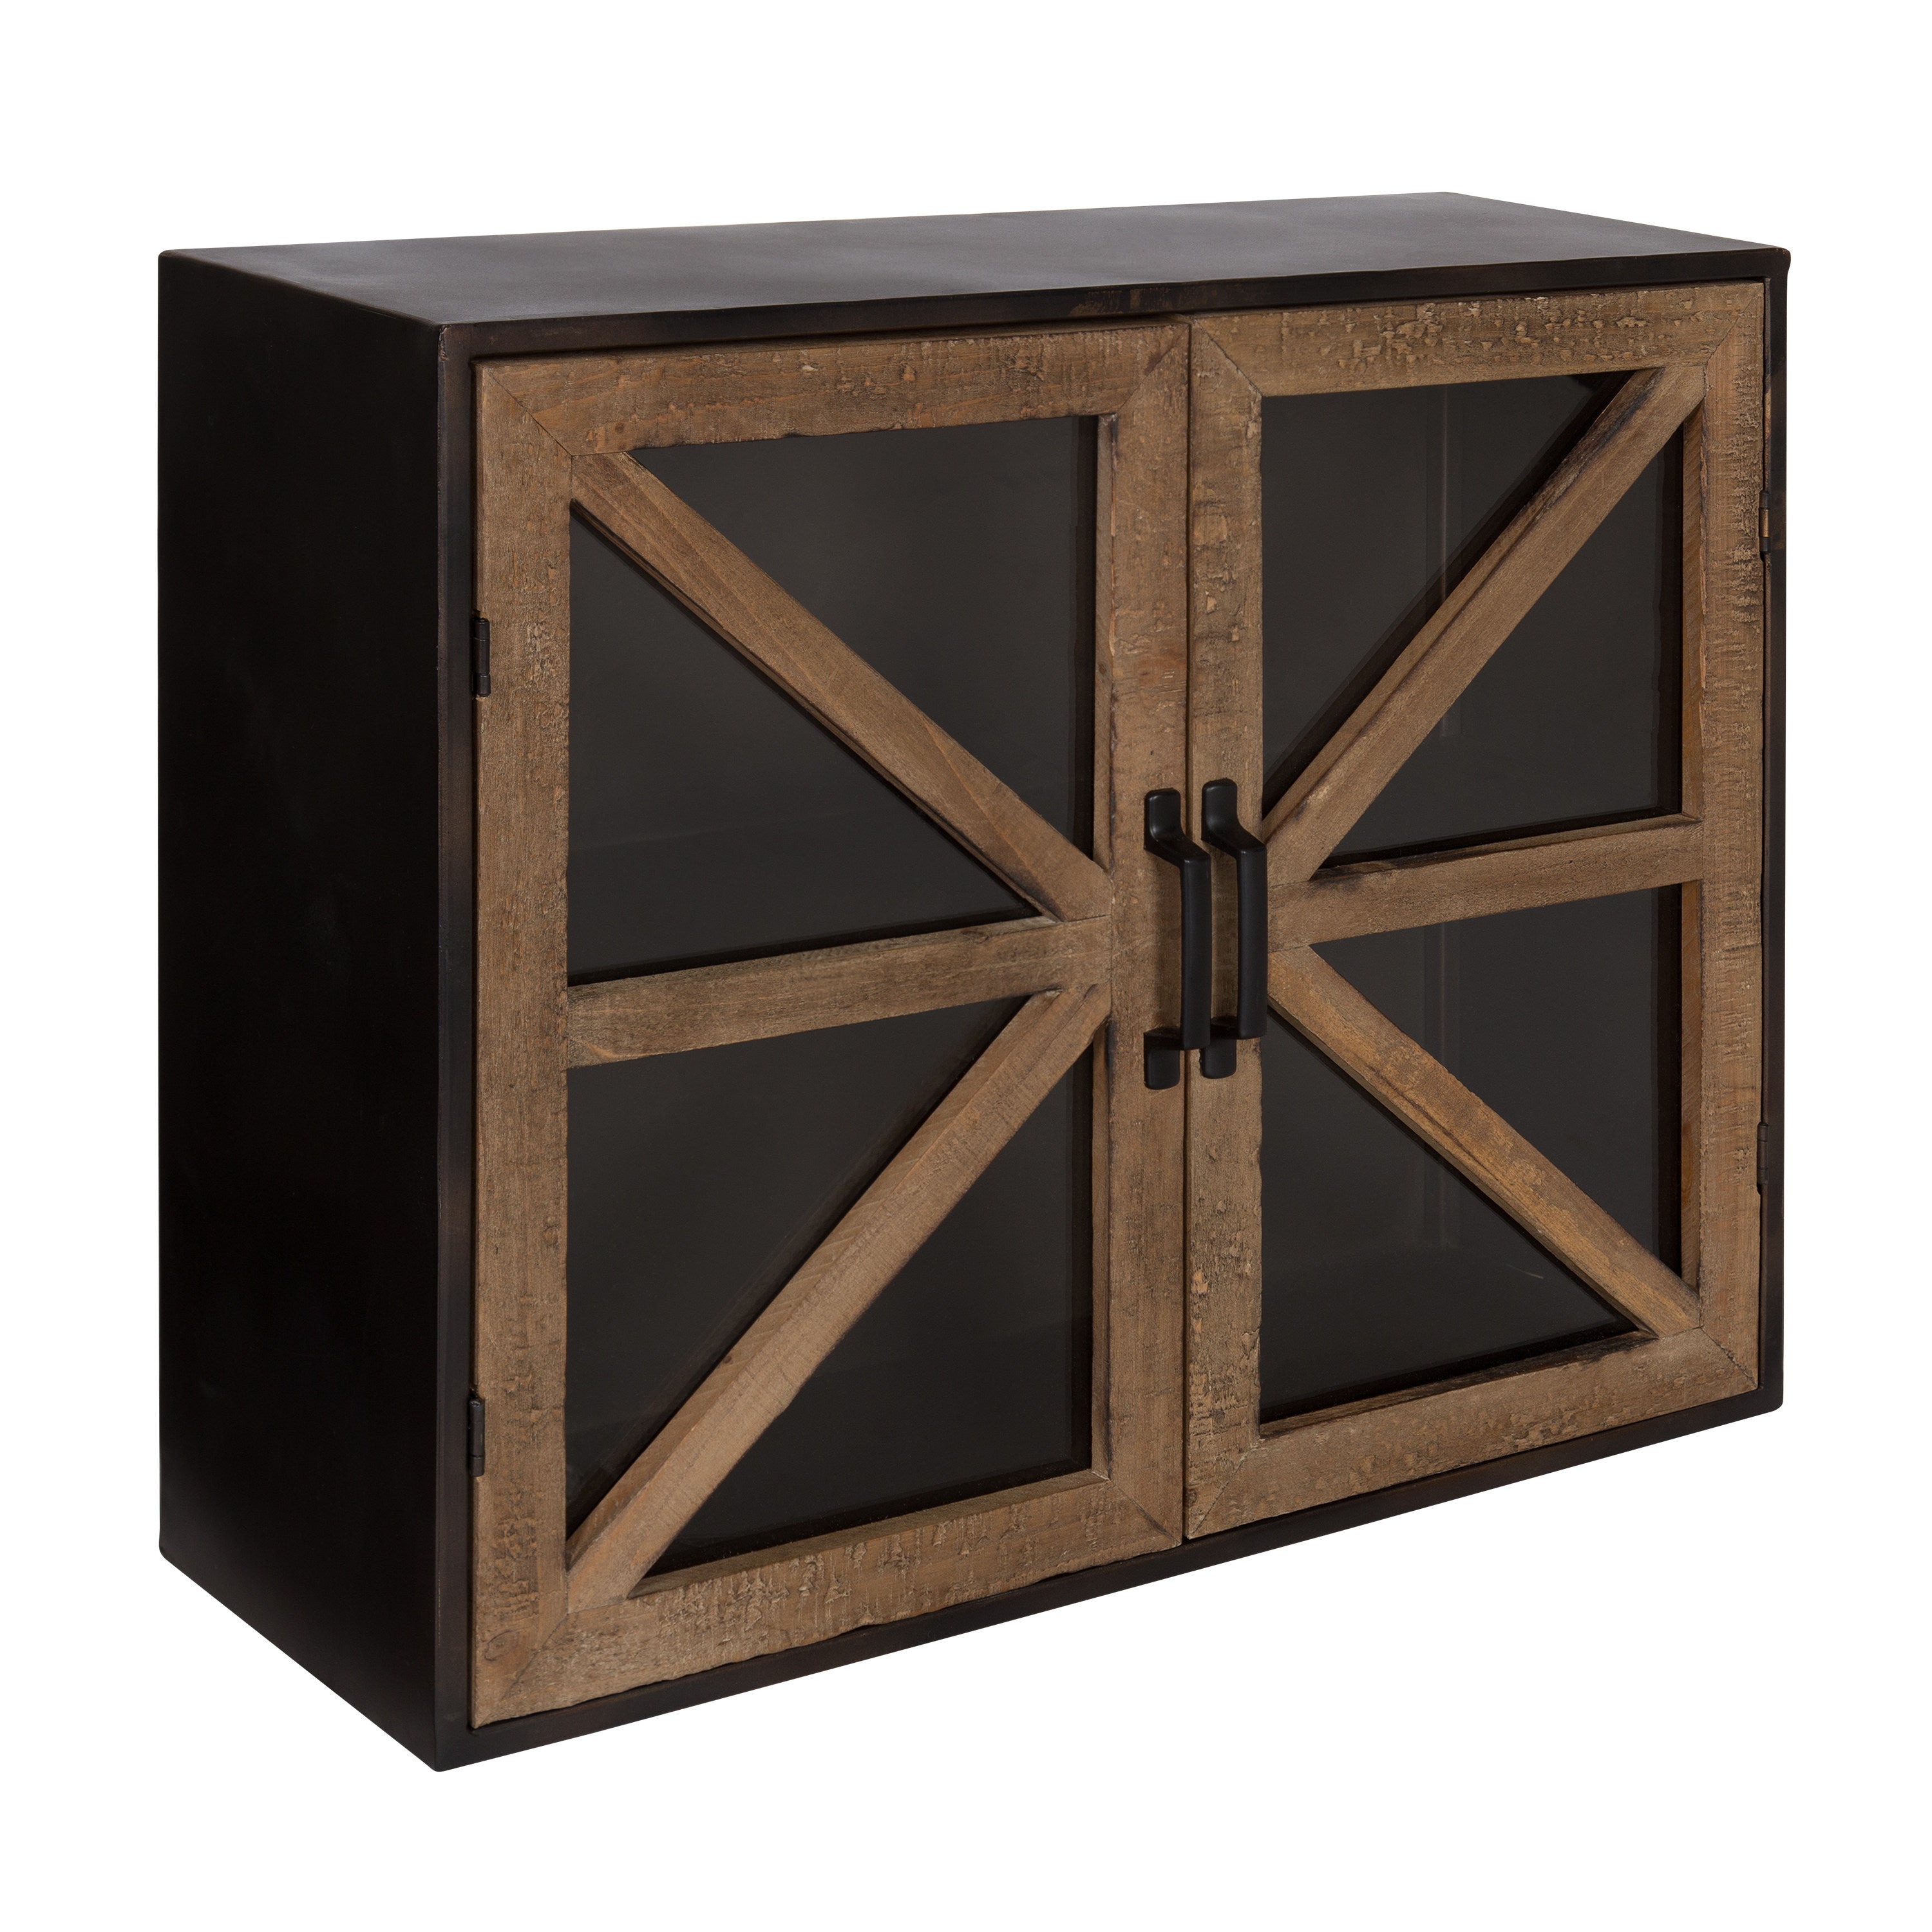 Mace Decorative Wall Mounted Rustic Wood and Metal 2-Door Cabinet